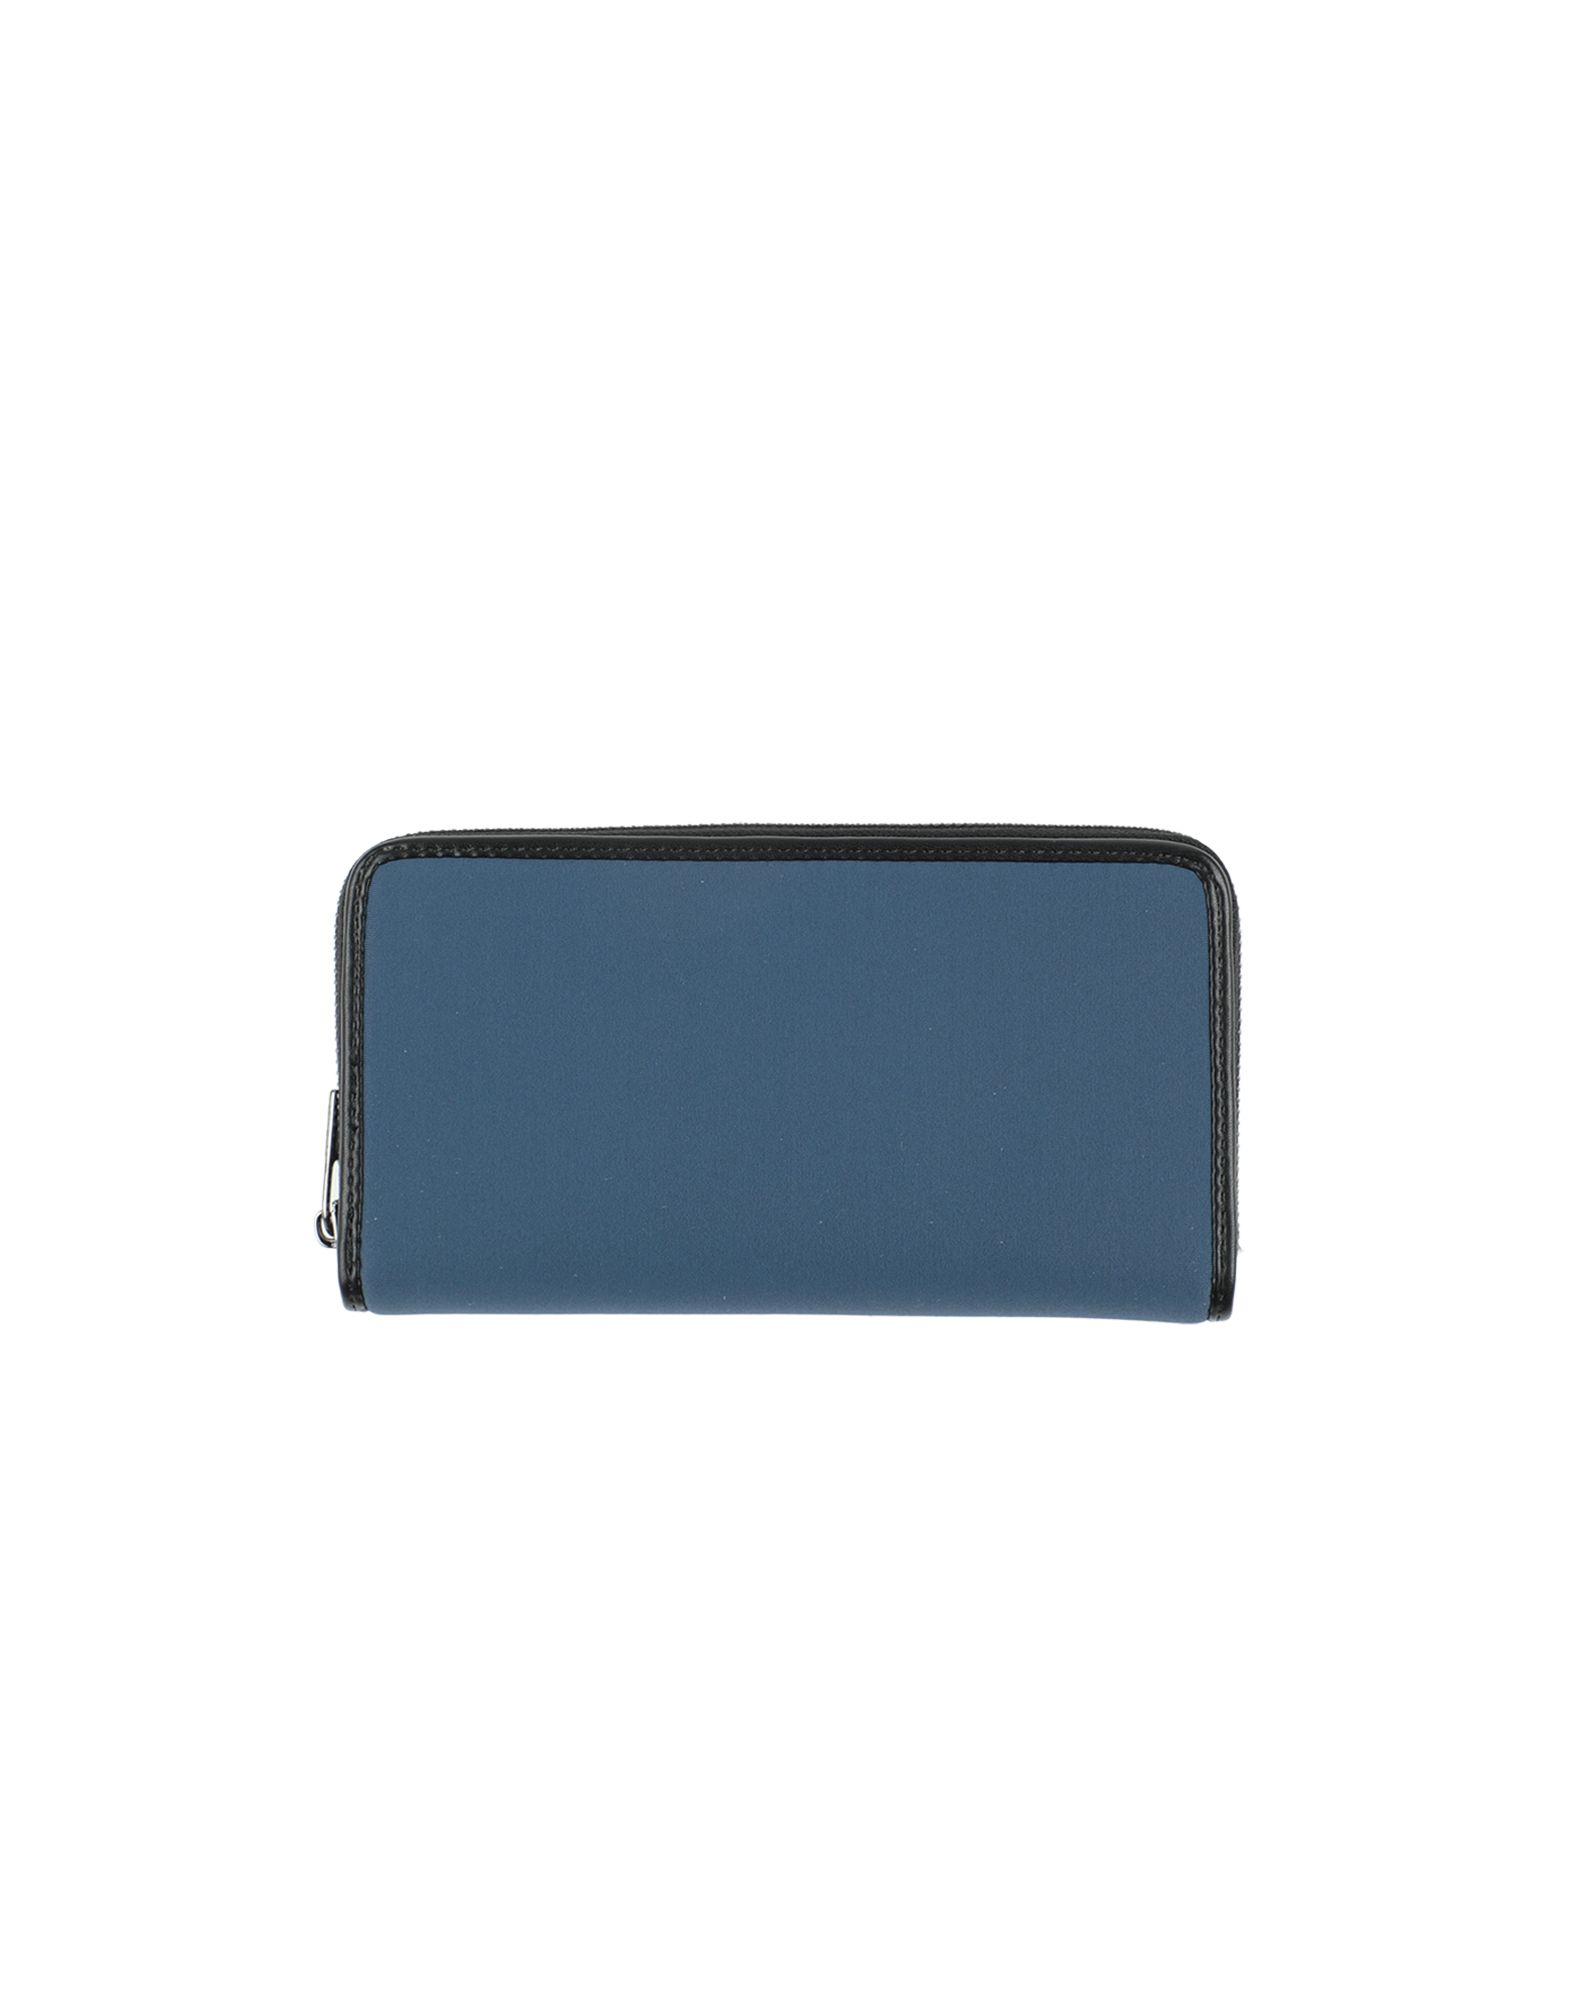 Save My Bag Wallets In Blue